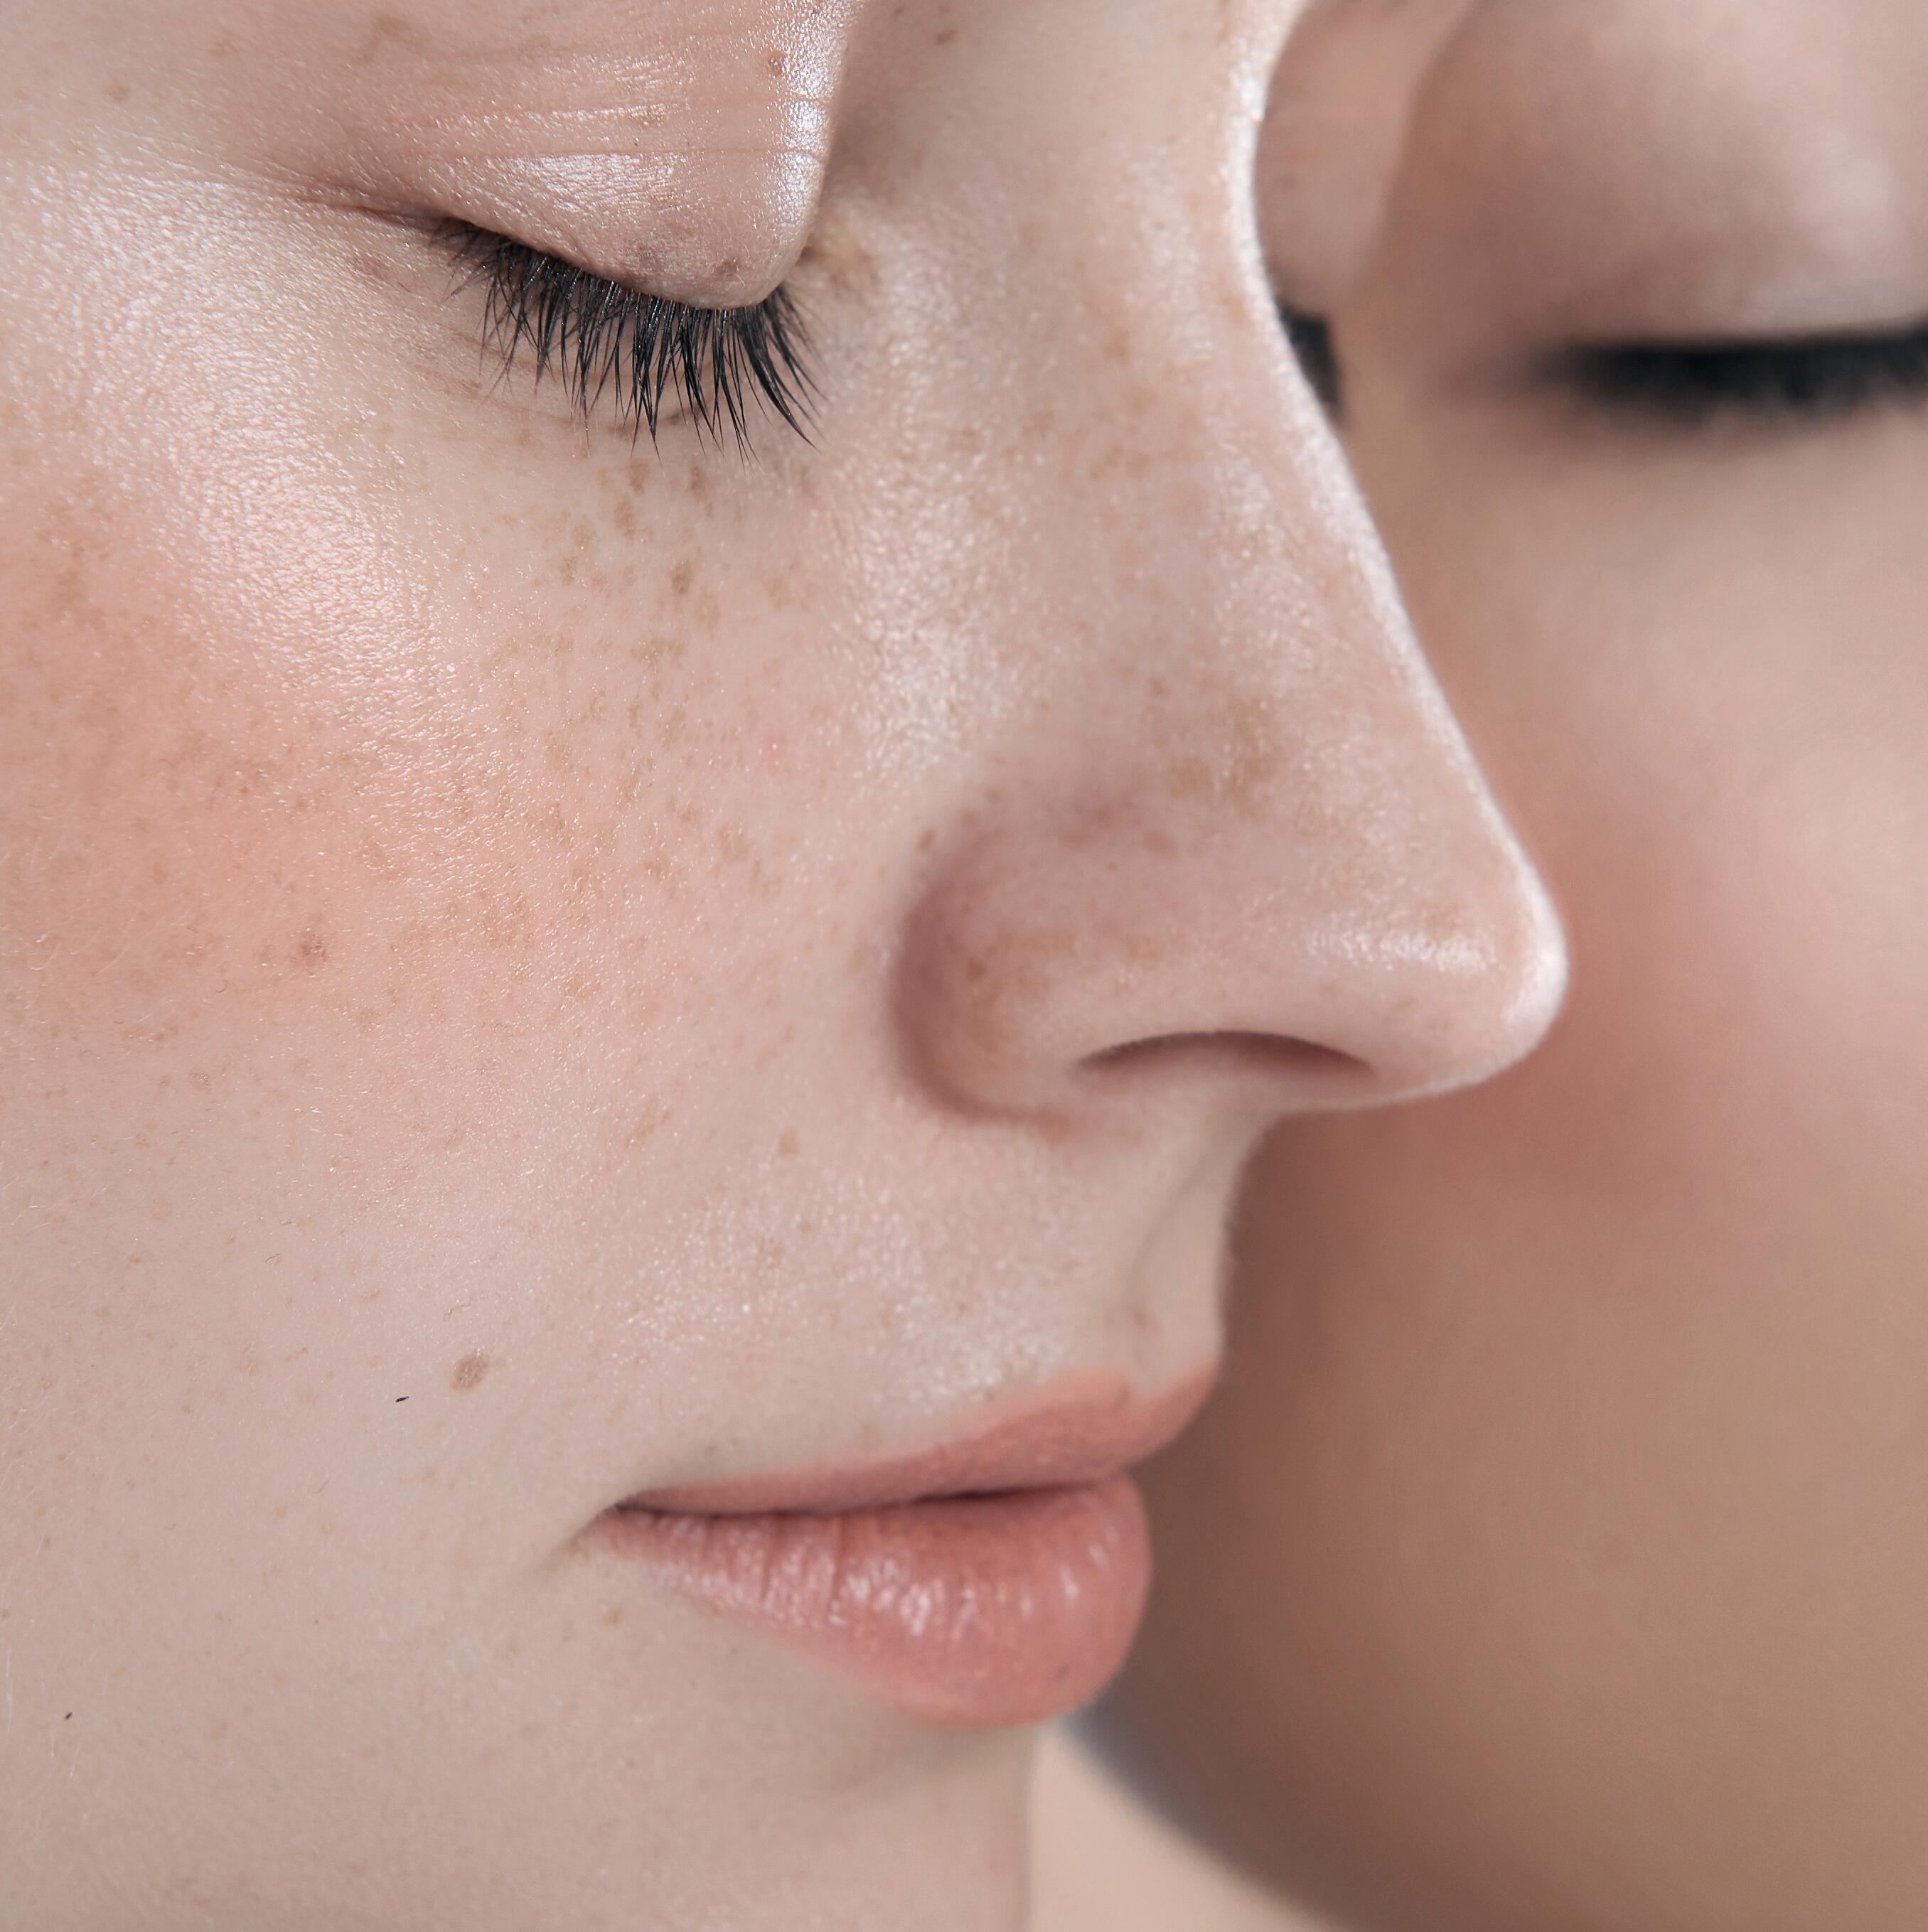 AD_ROSACEA_WOMEN-EYES-CLOSED_SQUARE_2021 472x472